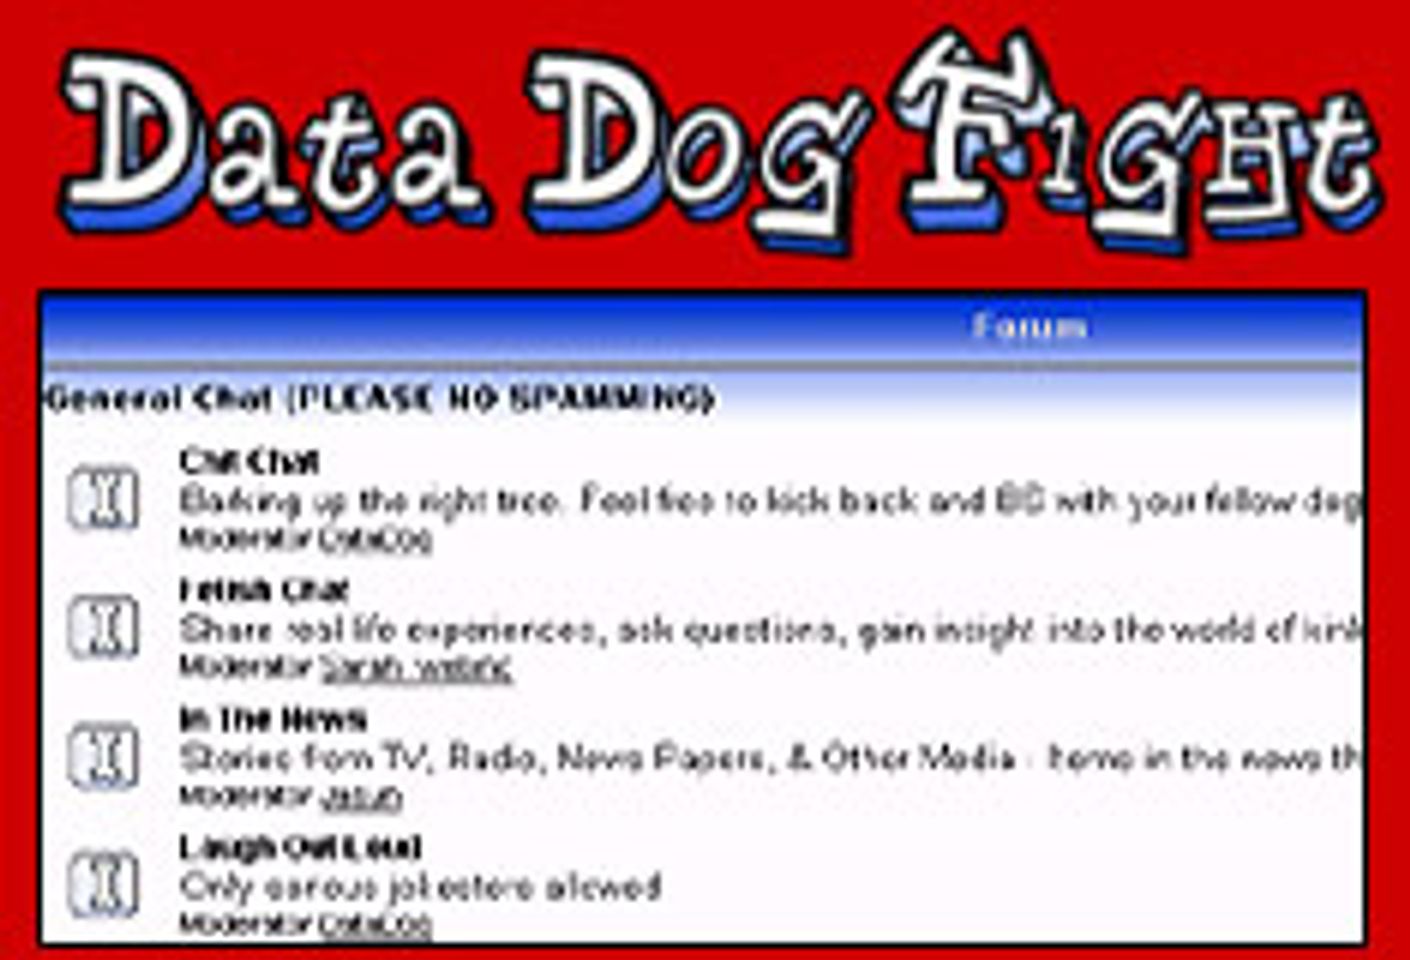 Who Let The Dog Out? DataDogFight.com Message Board Launches